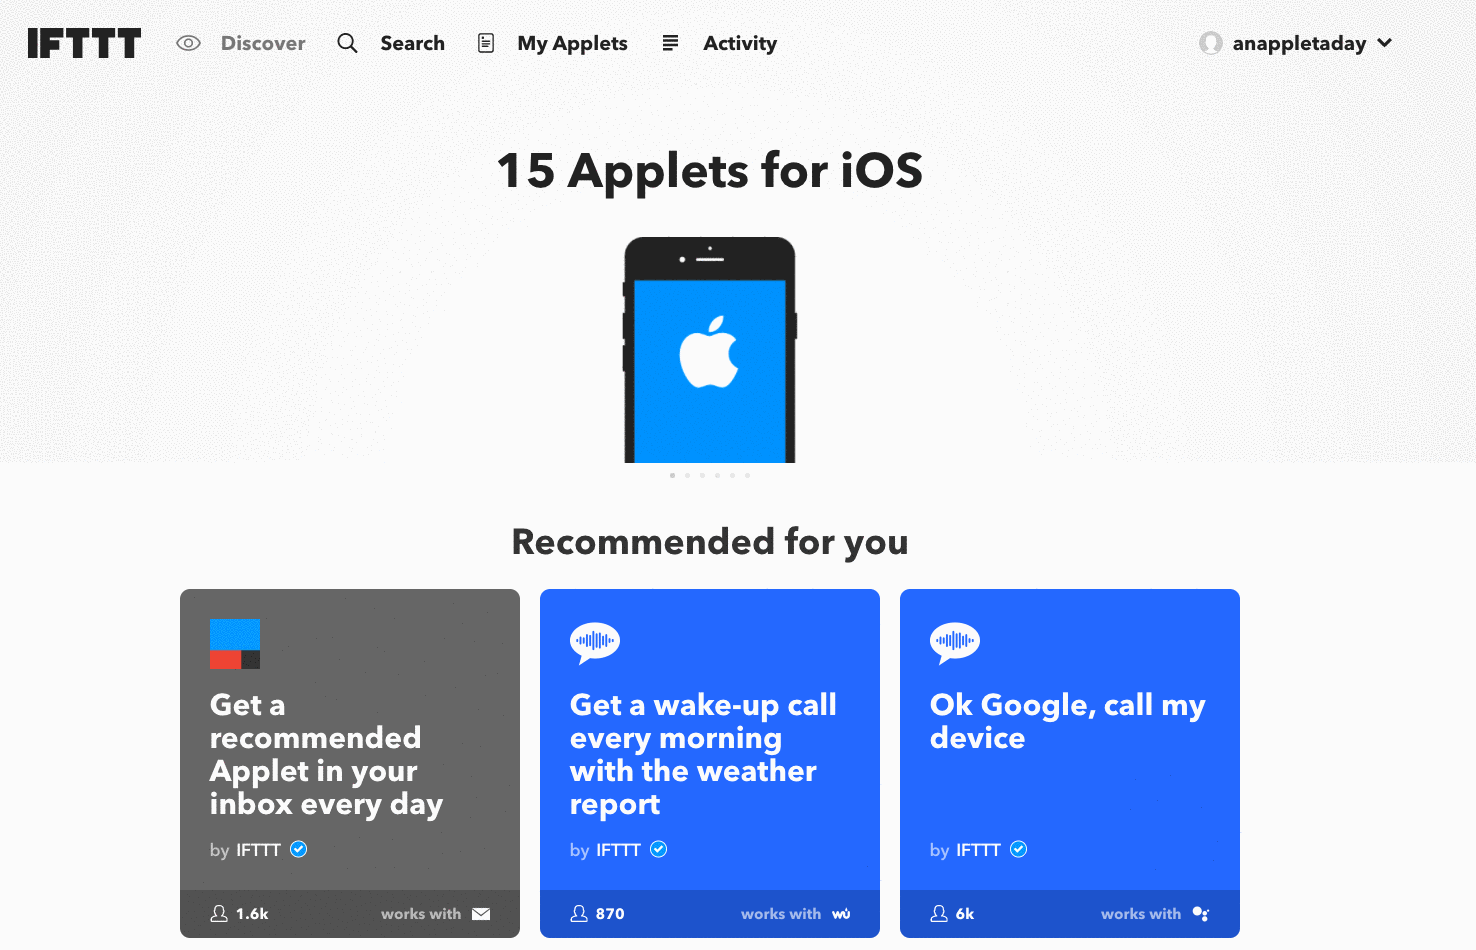 Go to ifttt.com/create to build your own Applet using the IFTTT service to follow an app or device